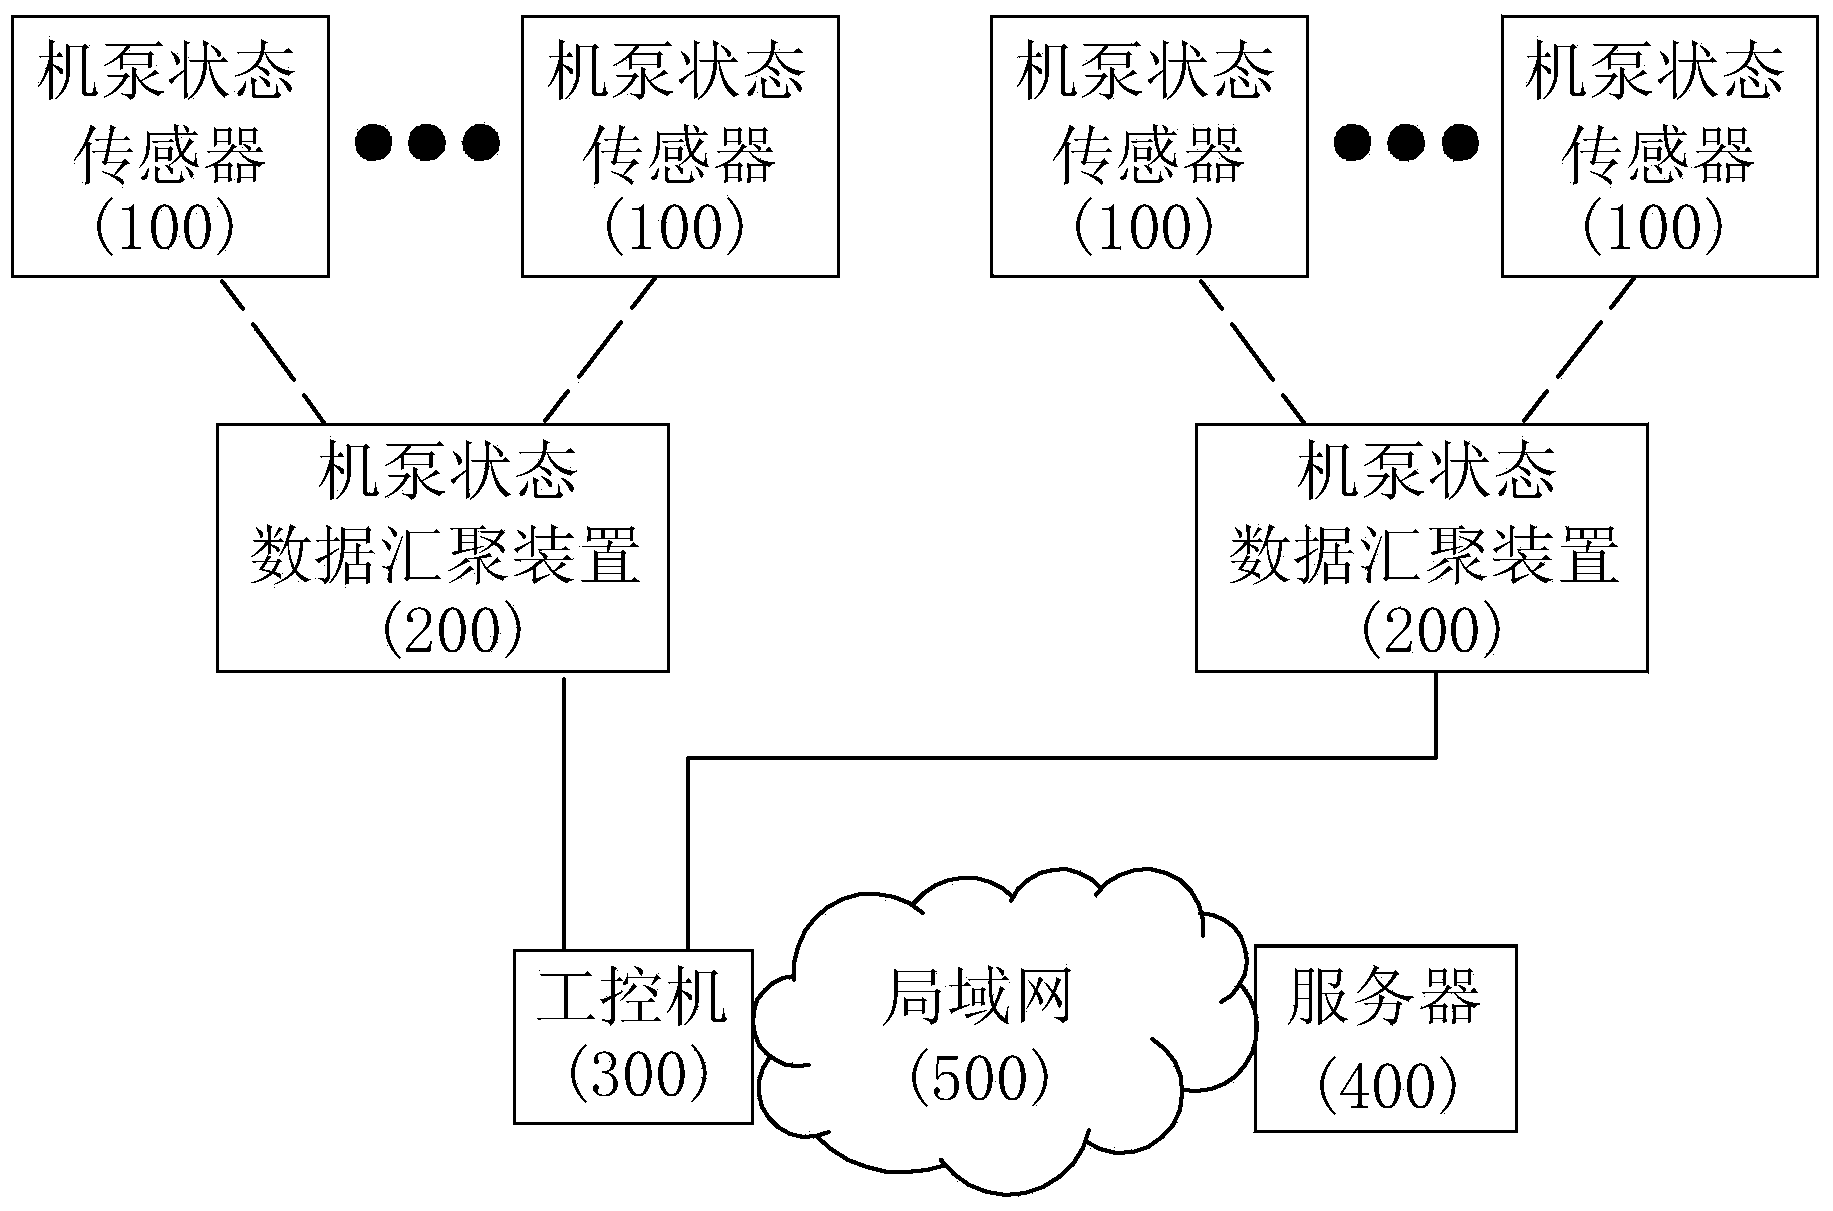 Pump group state online monitoring system and method